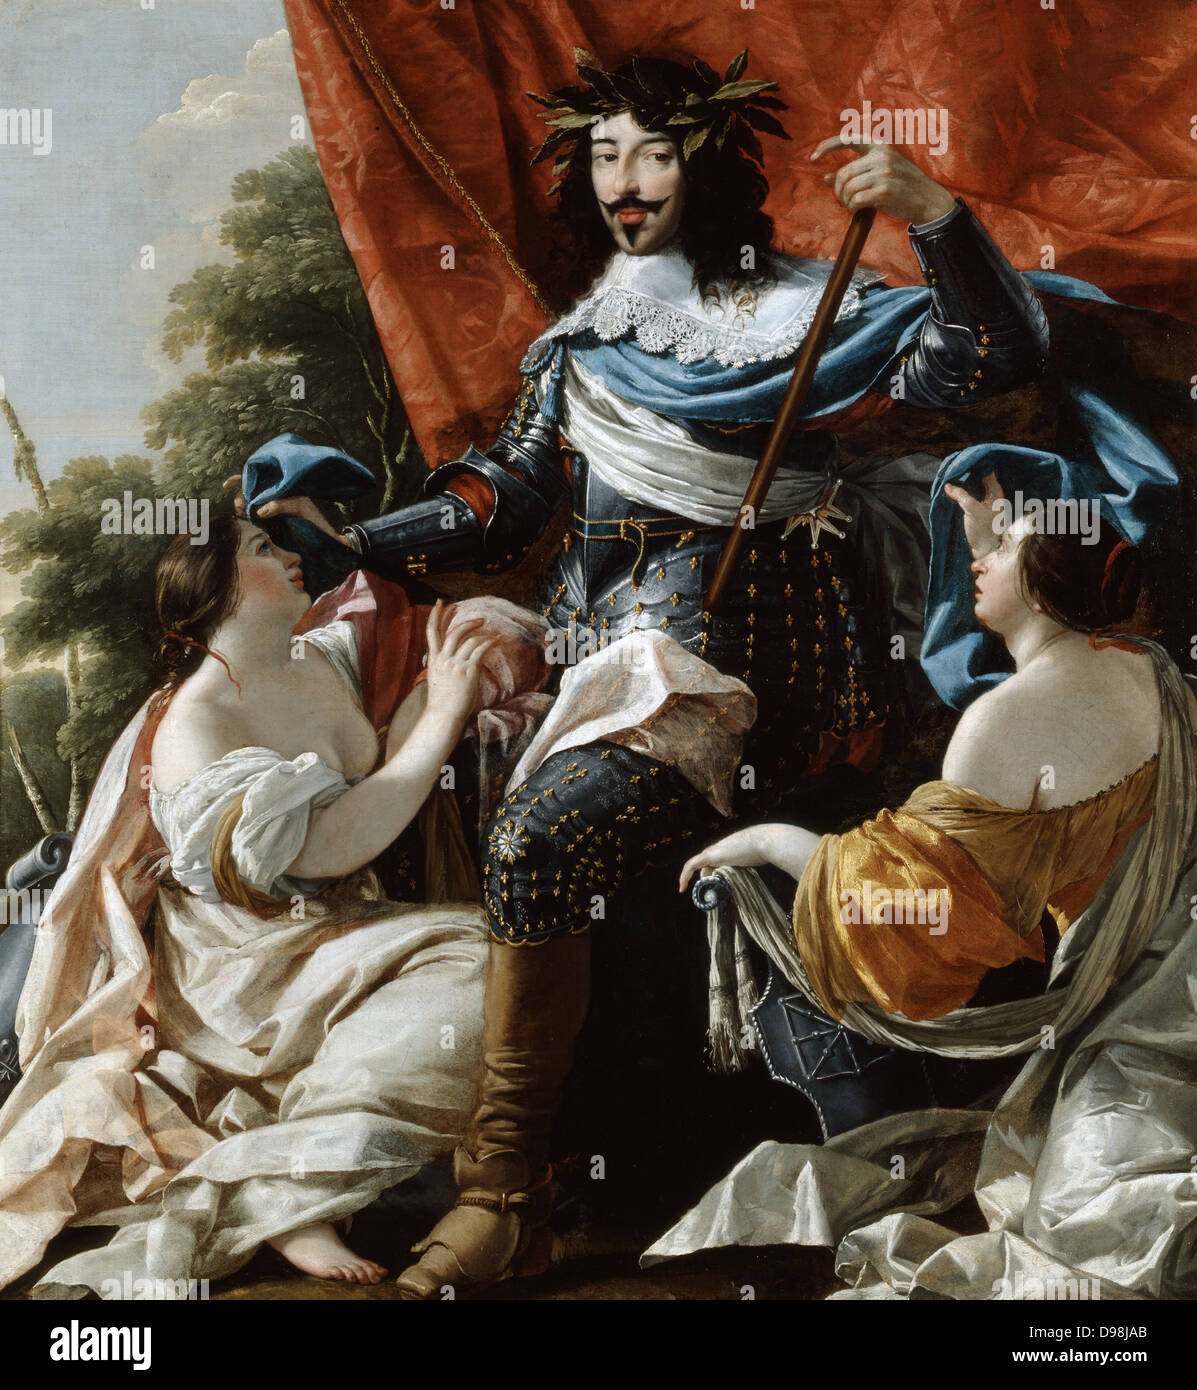 Louis XIII between female figures representing France and Navarre. Oil on canvas by Simon Vouet (1590-1649) French painter. Kingdoms of France and Navarre united on the accession of Henry of Navarre as Henry IV of France, Louis' father, in 1589. Stock Photo